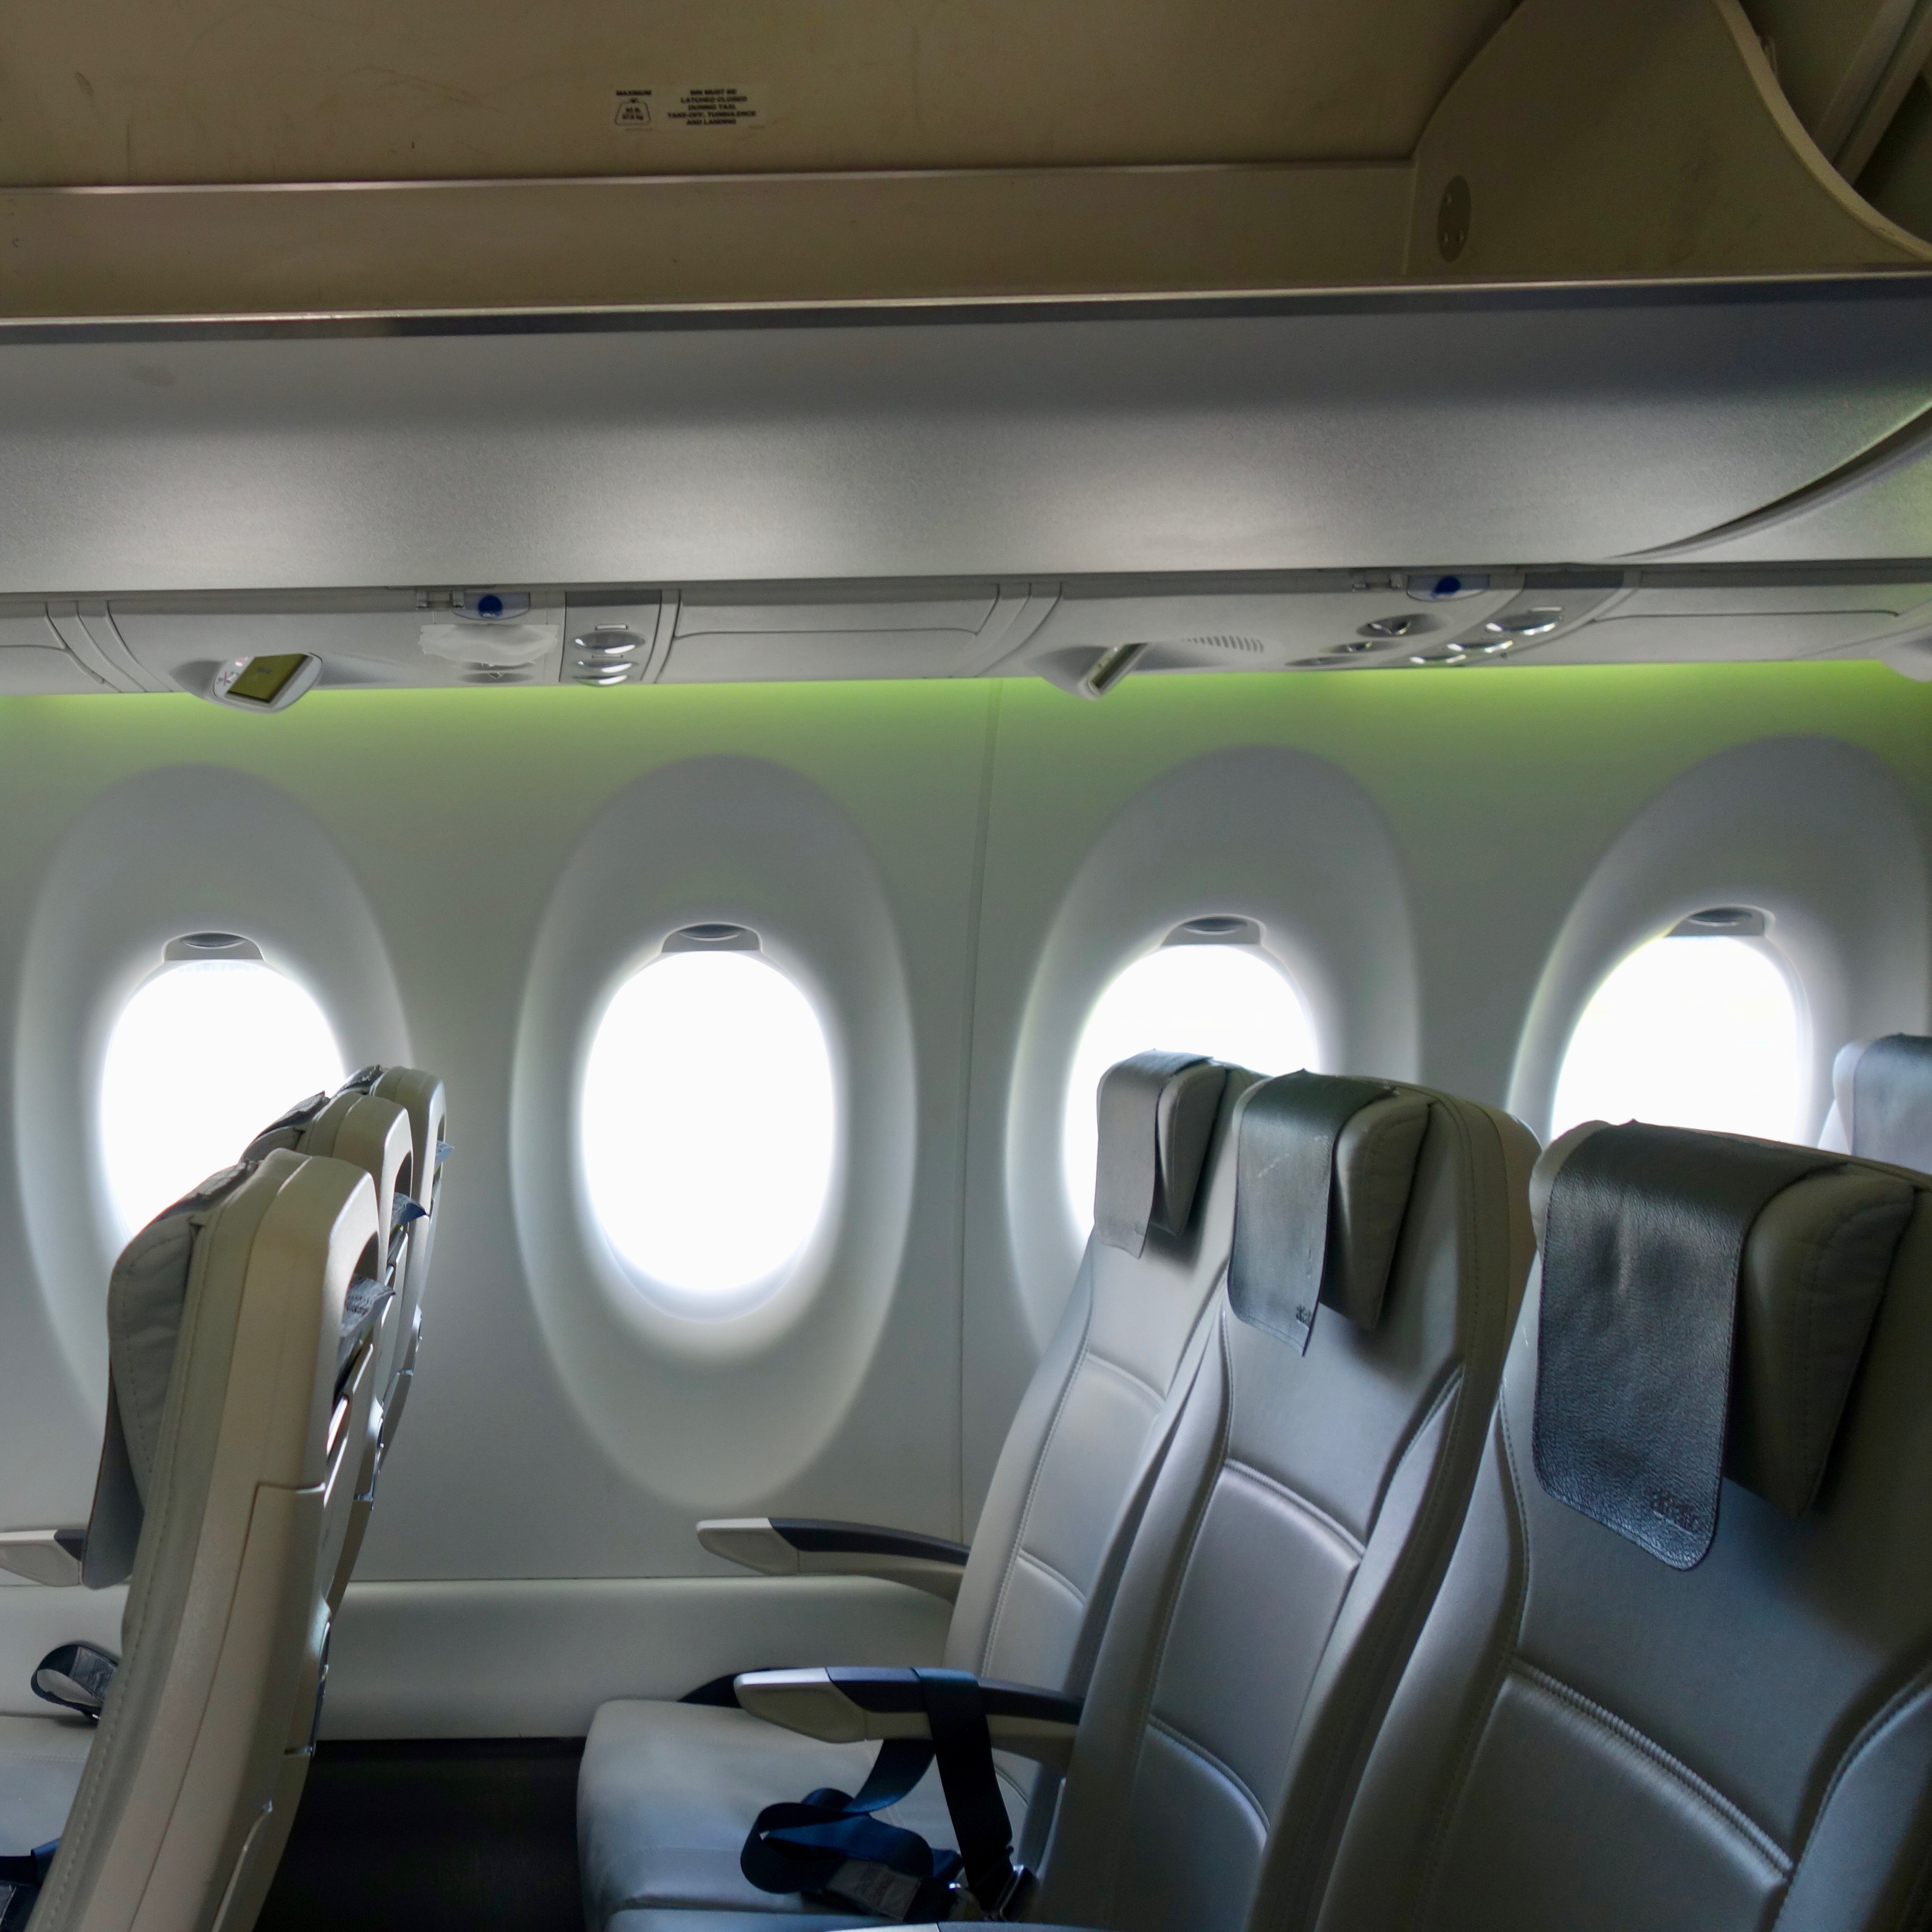 The Airbus A220 is a modern airliner, and airBaltic adds their branding touch with green neon cabin lighting shown adjacent to the overhead luggage bins.  The three seats leading to the large sunny windows are made from gray leather. 